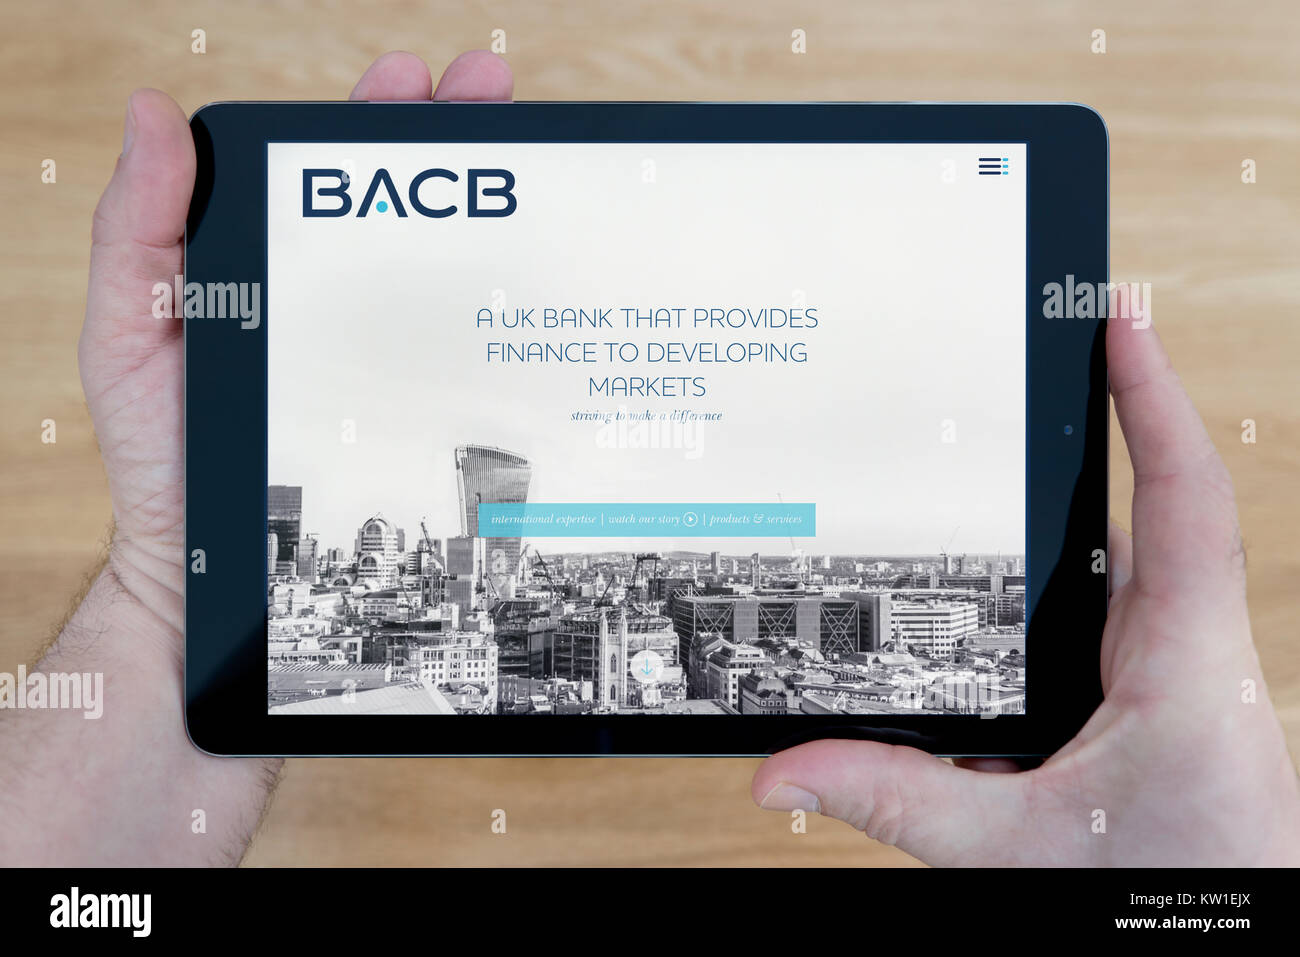 A man looks at the British Arab Commercial Bank (BACB) website on his iPad tablet device, shot against a wooden table top background (Editorial only) Stock Photo